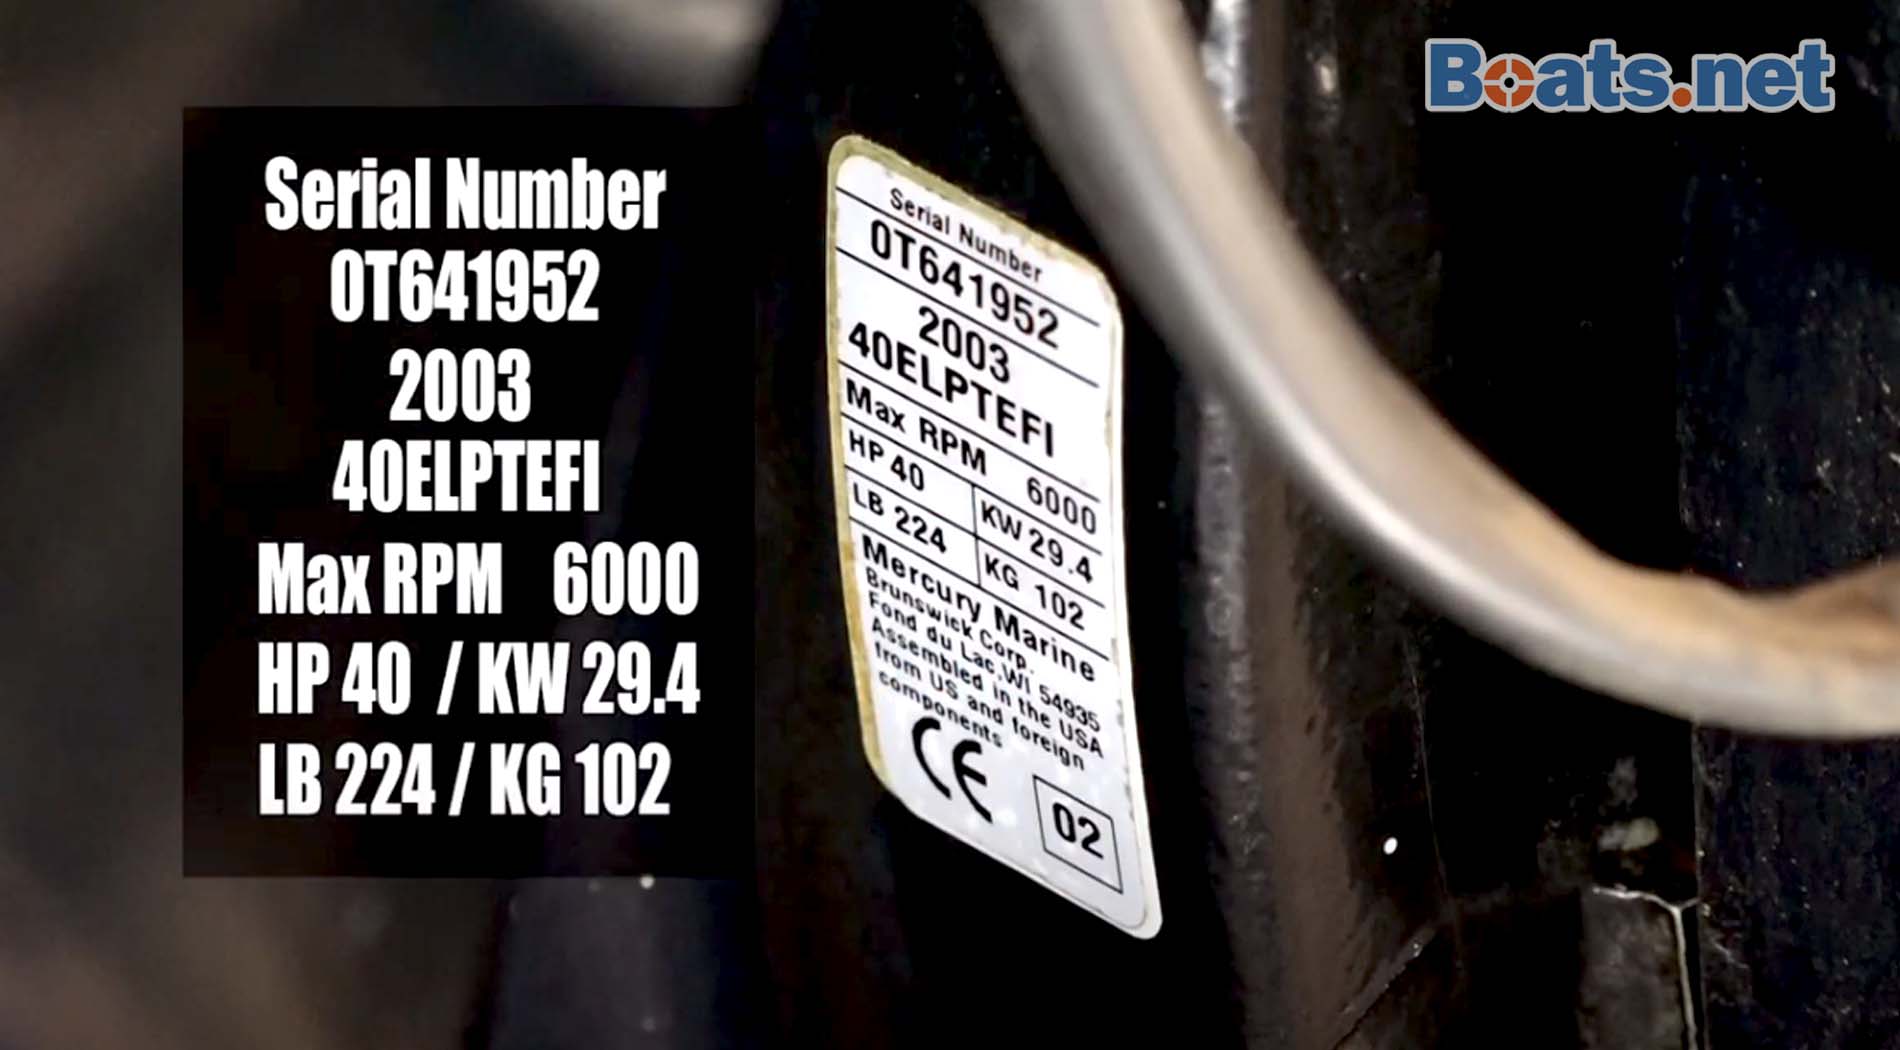 Mercury outboard serial number how to read